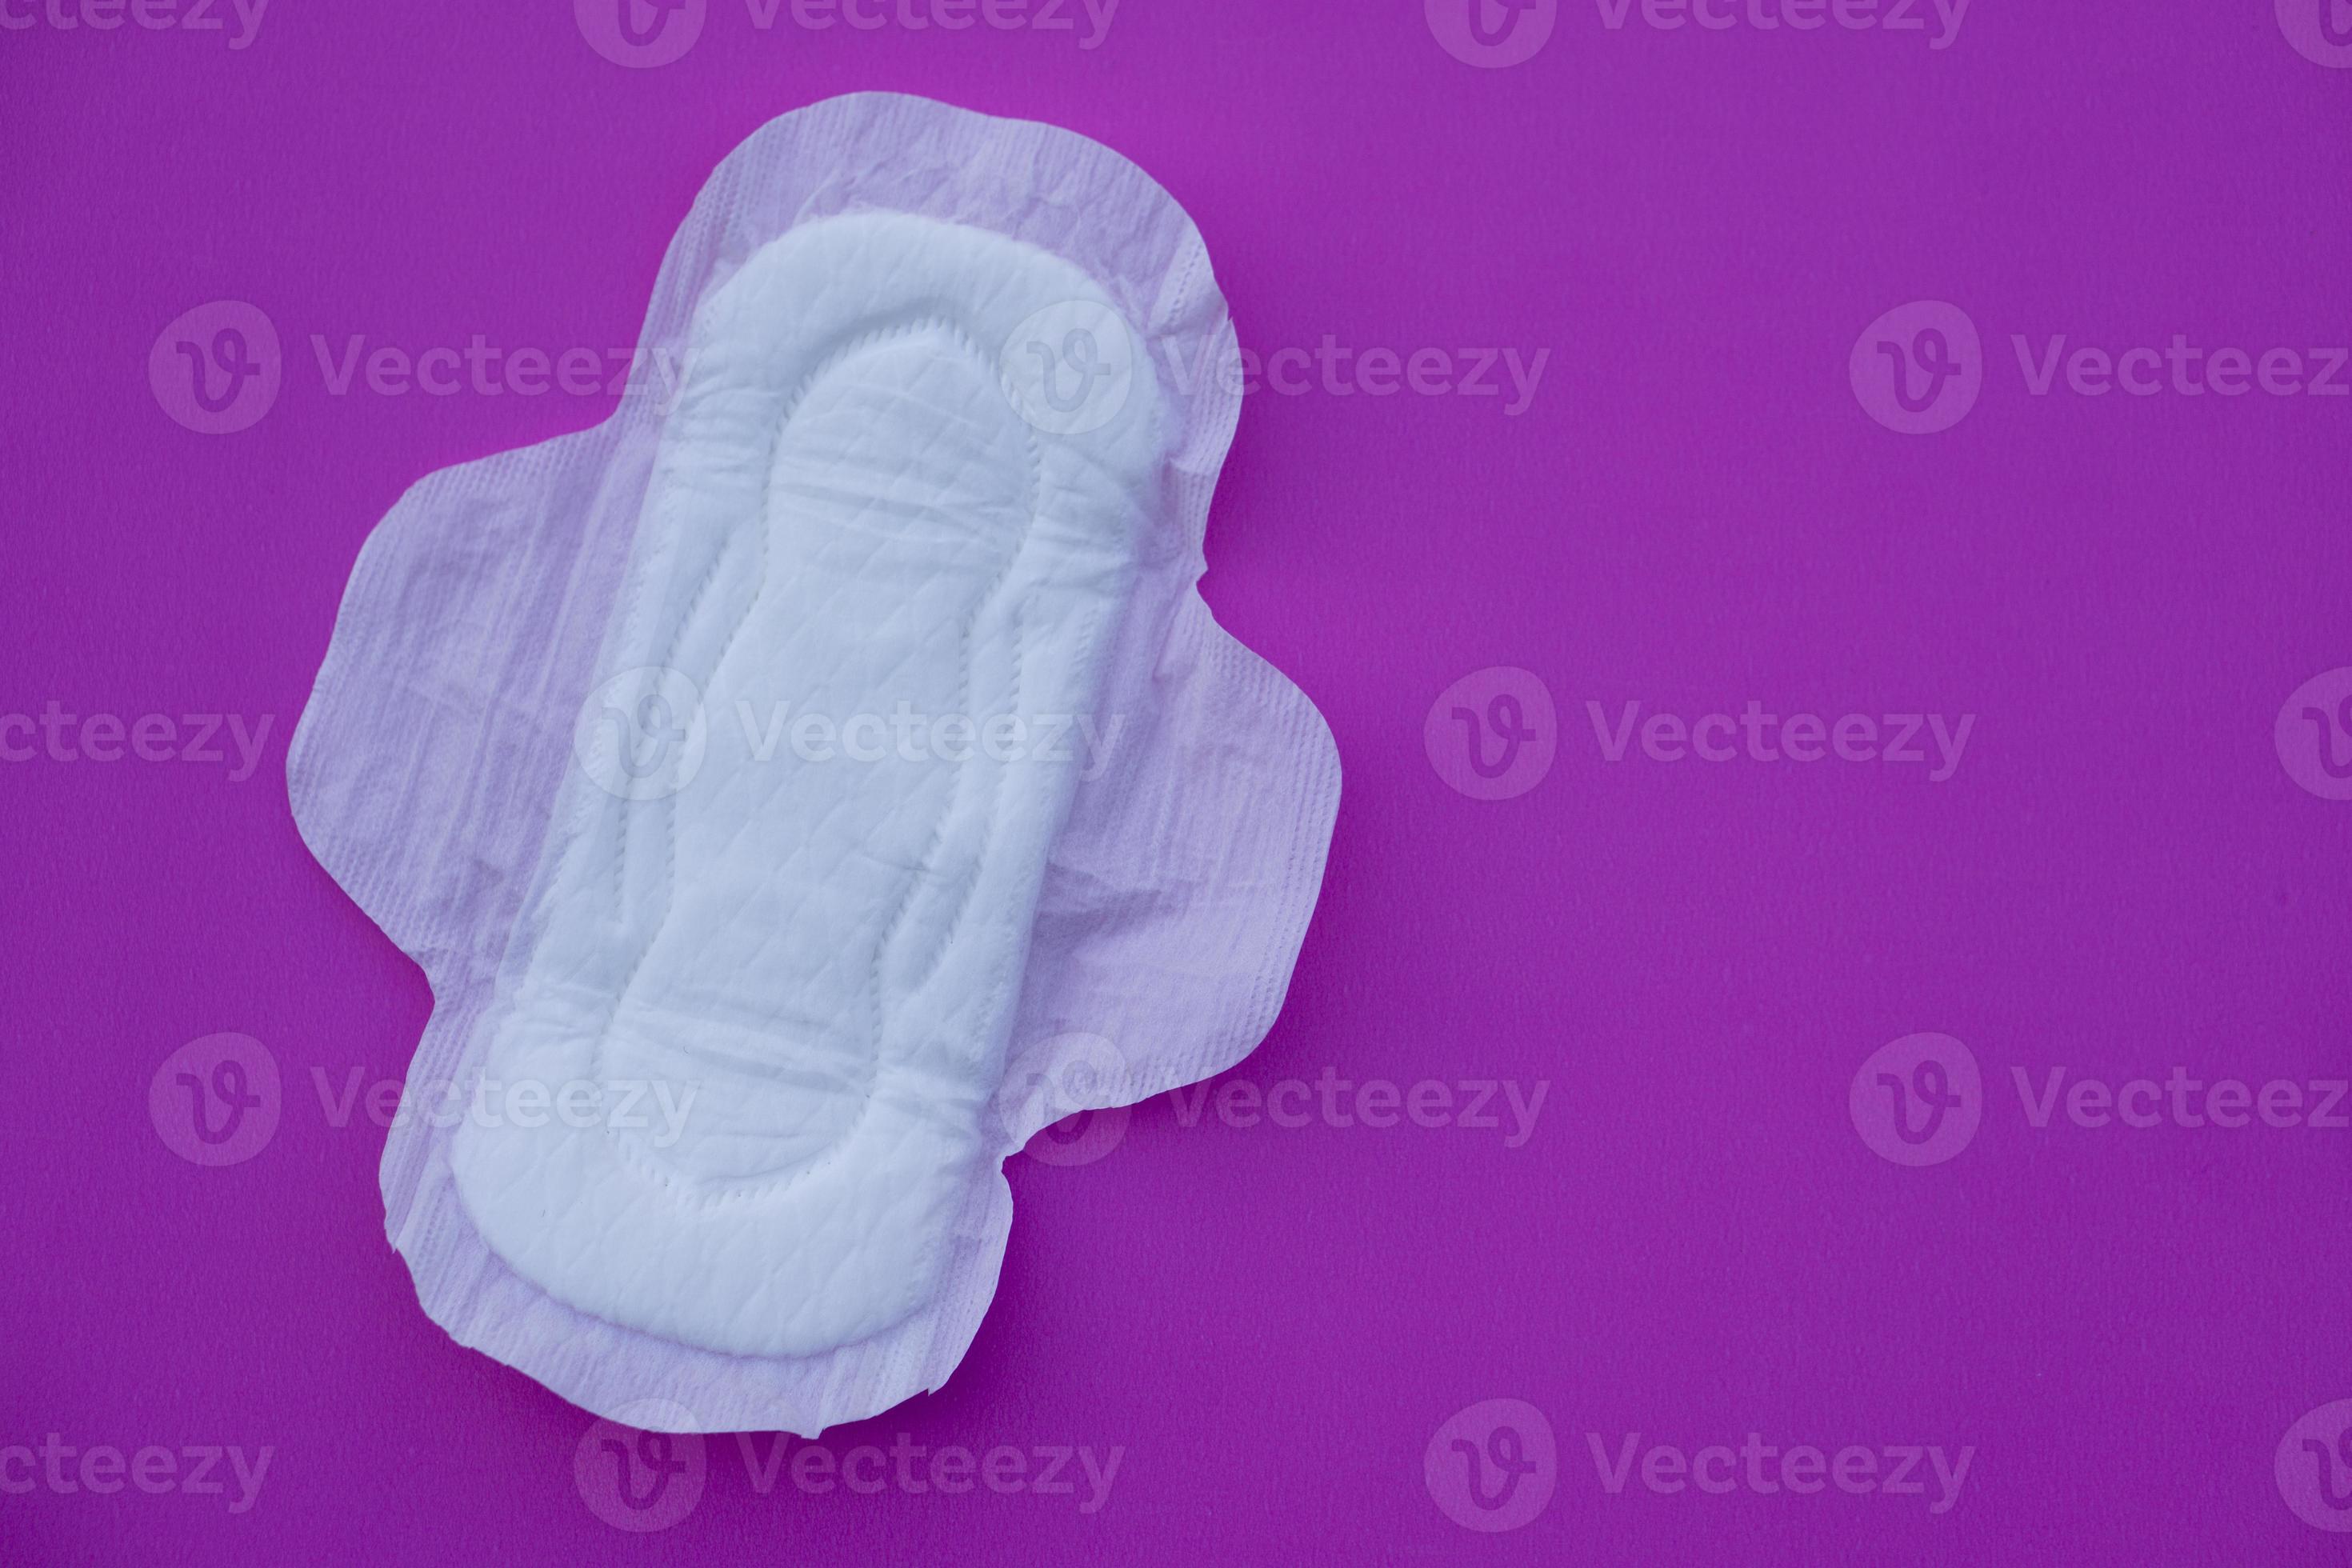 White sanitary pad on pink background. Concept, female's hygienic